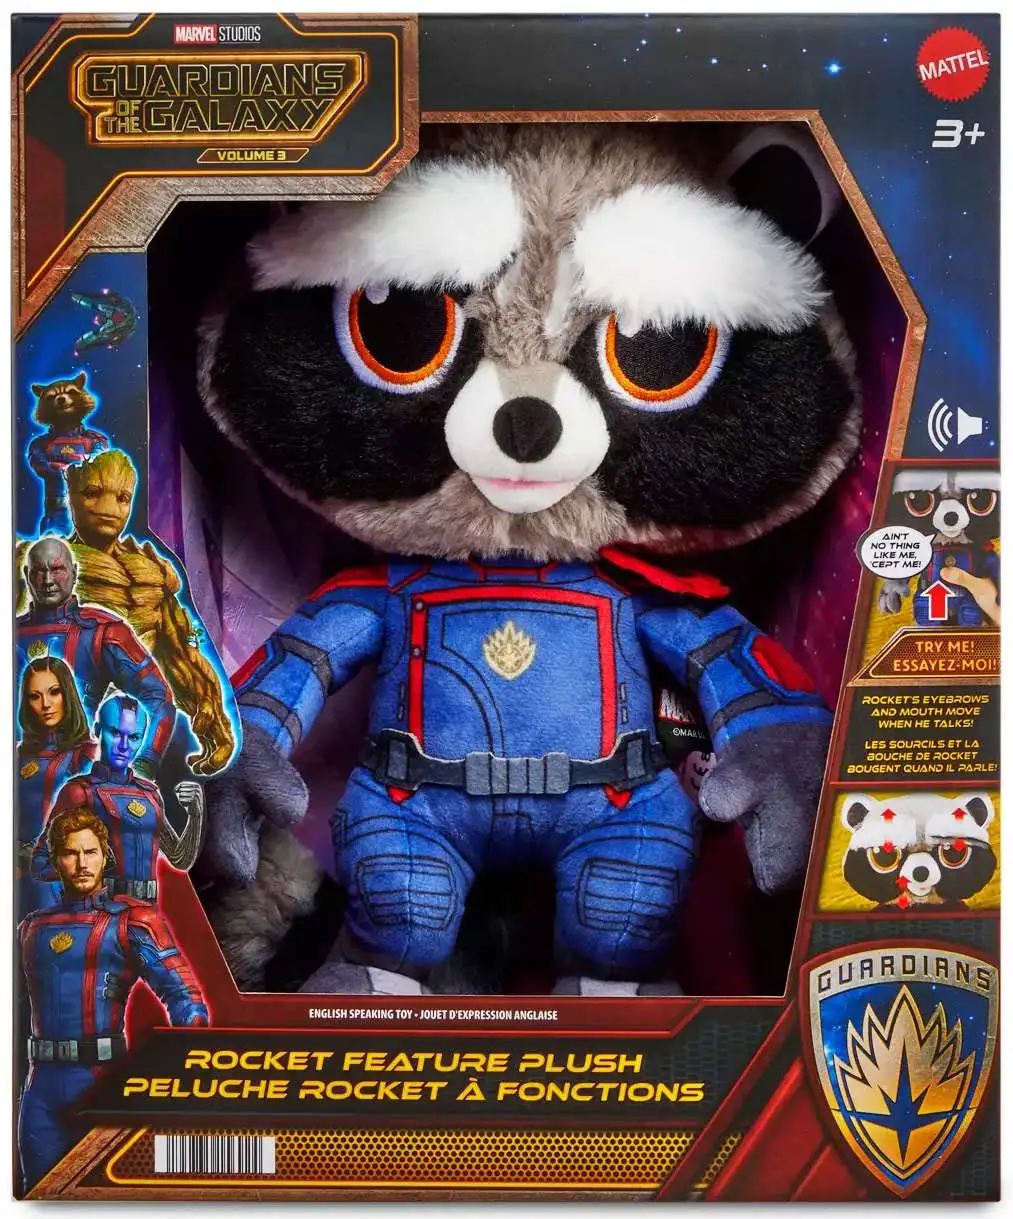 Marvel Guardians of the Galaxy Vol. 3 Rocket 11 Feature Plush